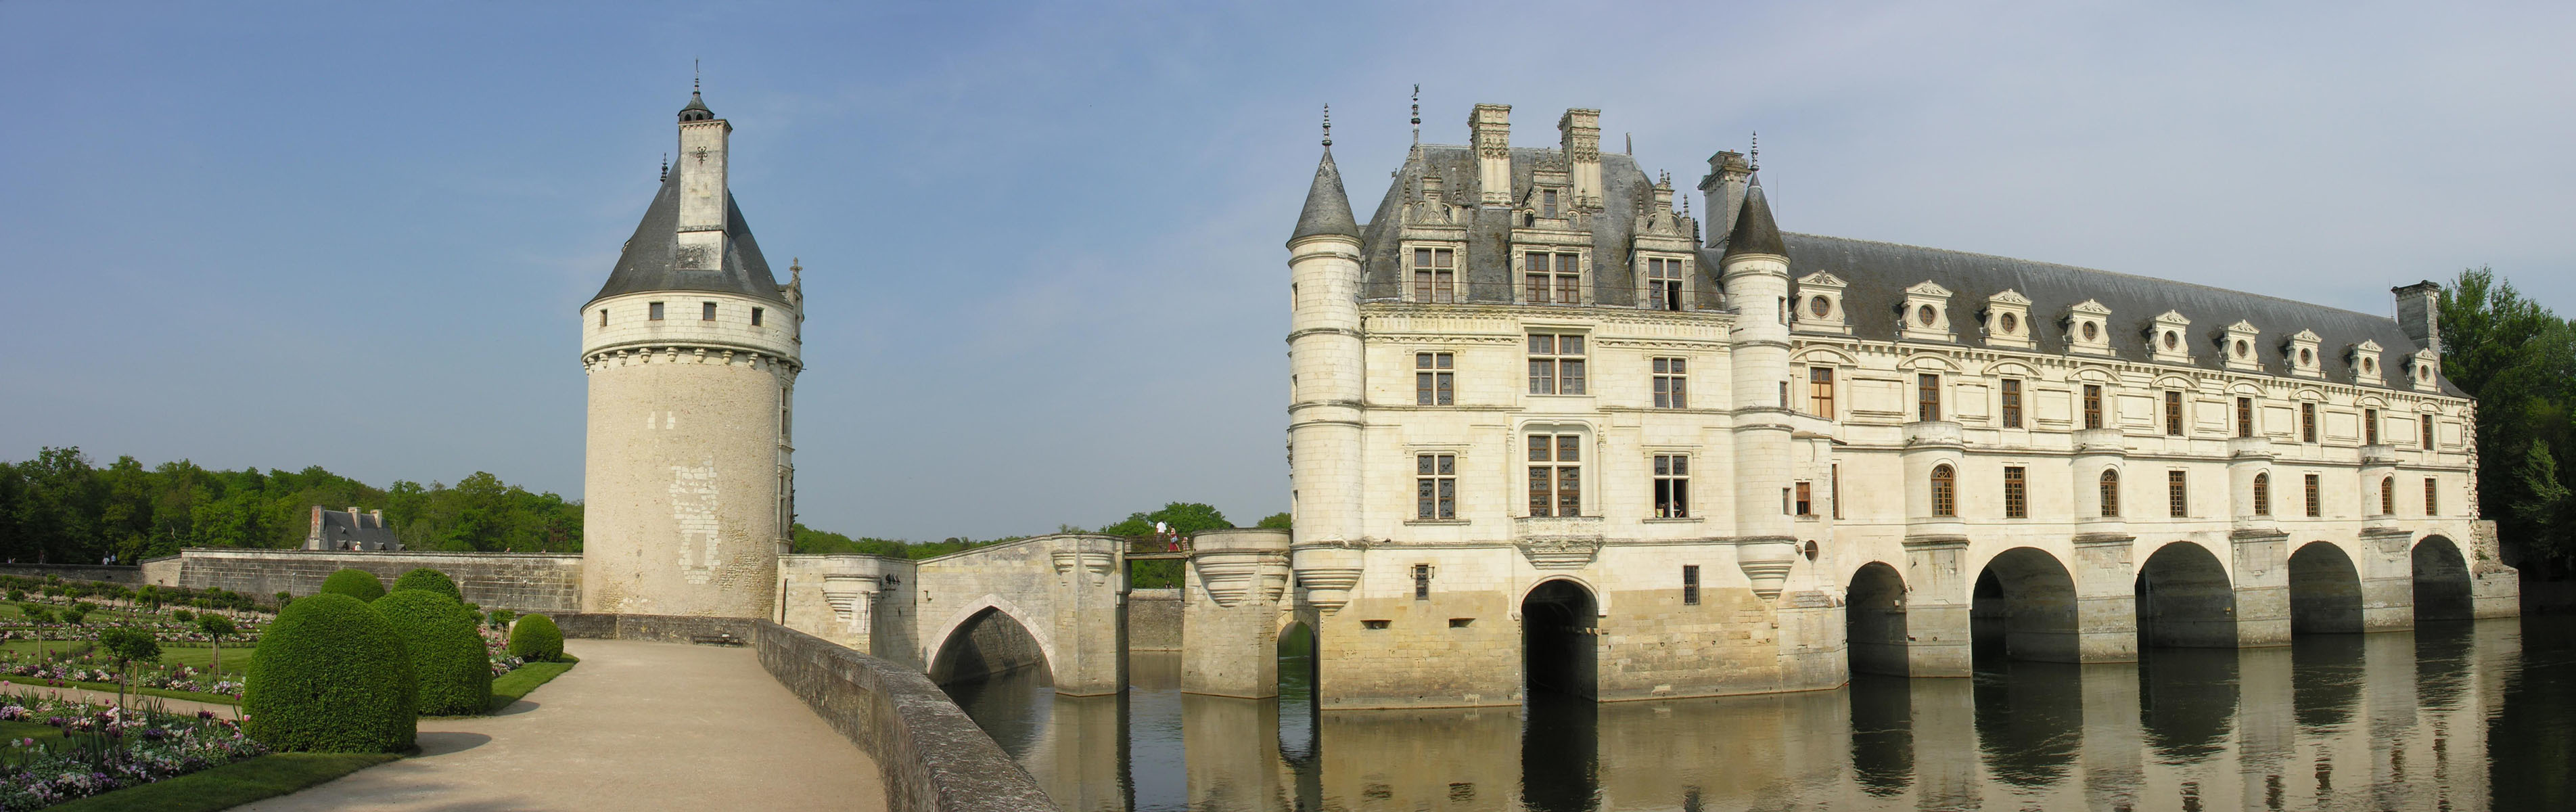 Castle of Chenonceau - France2.jpg